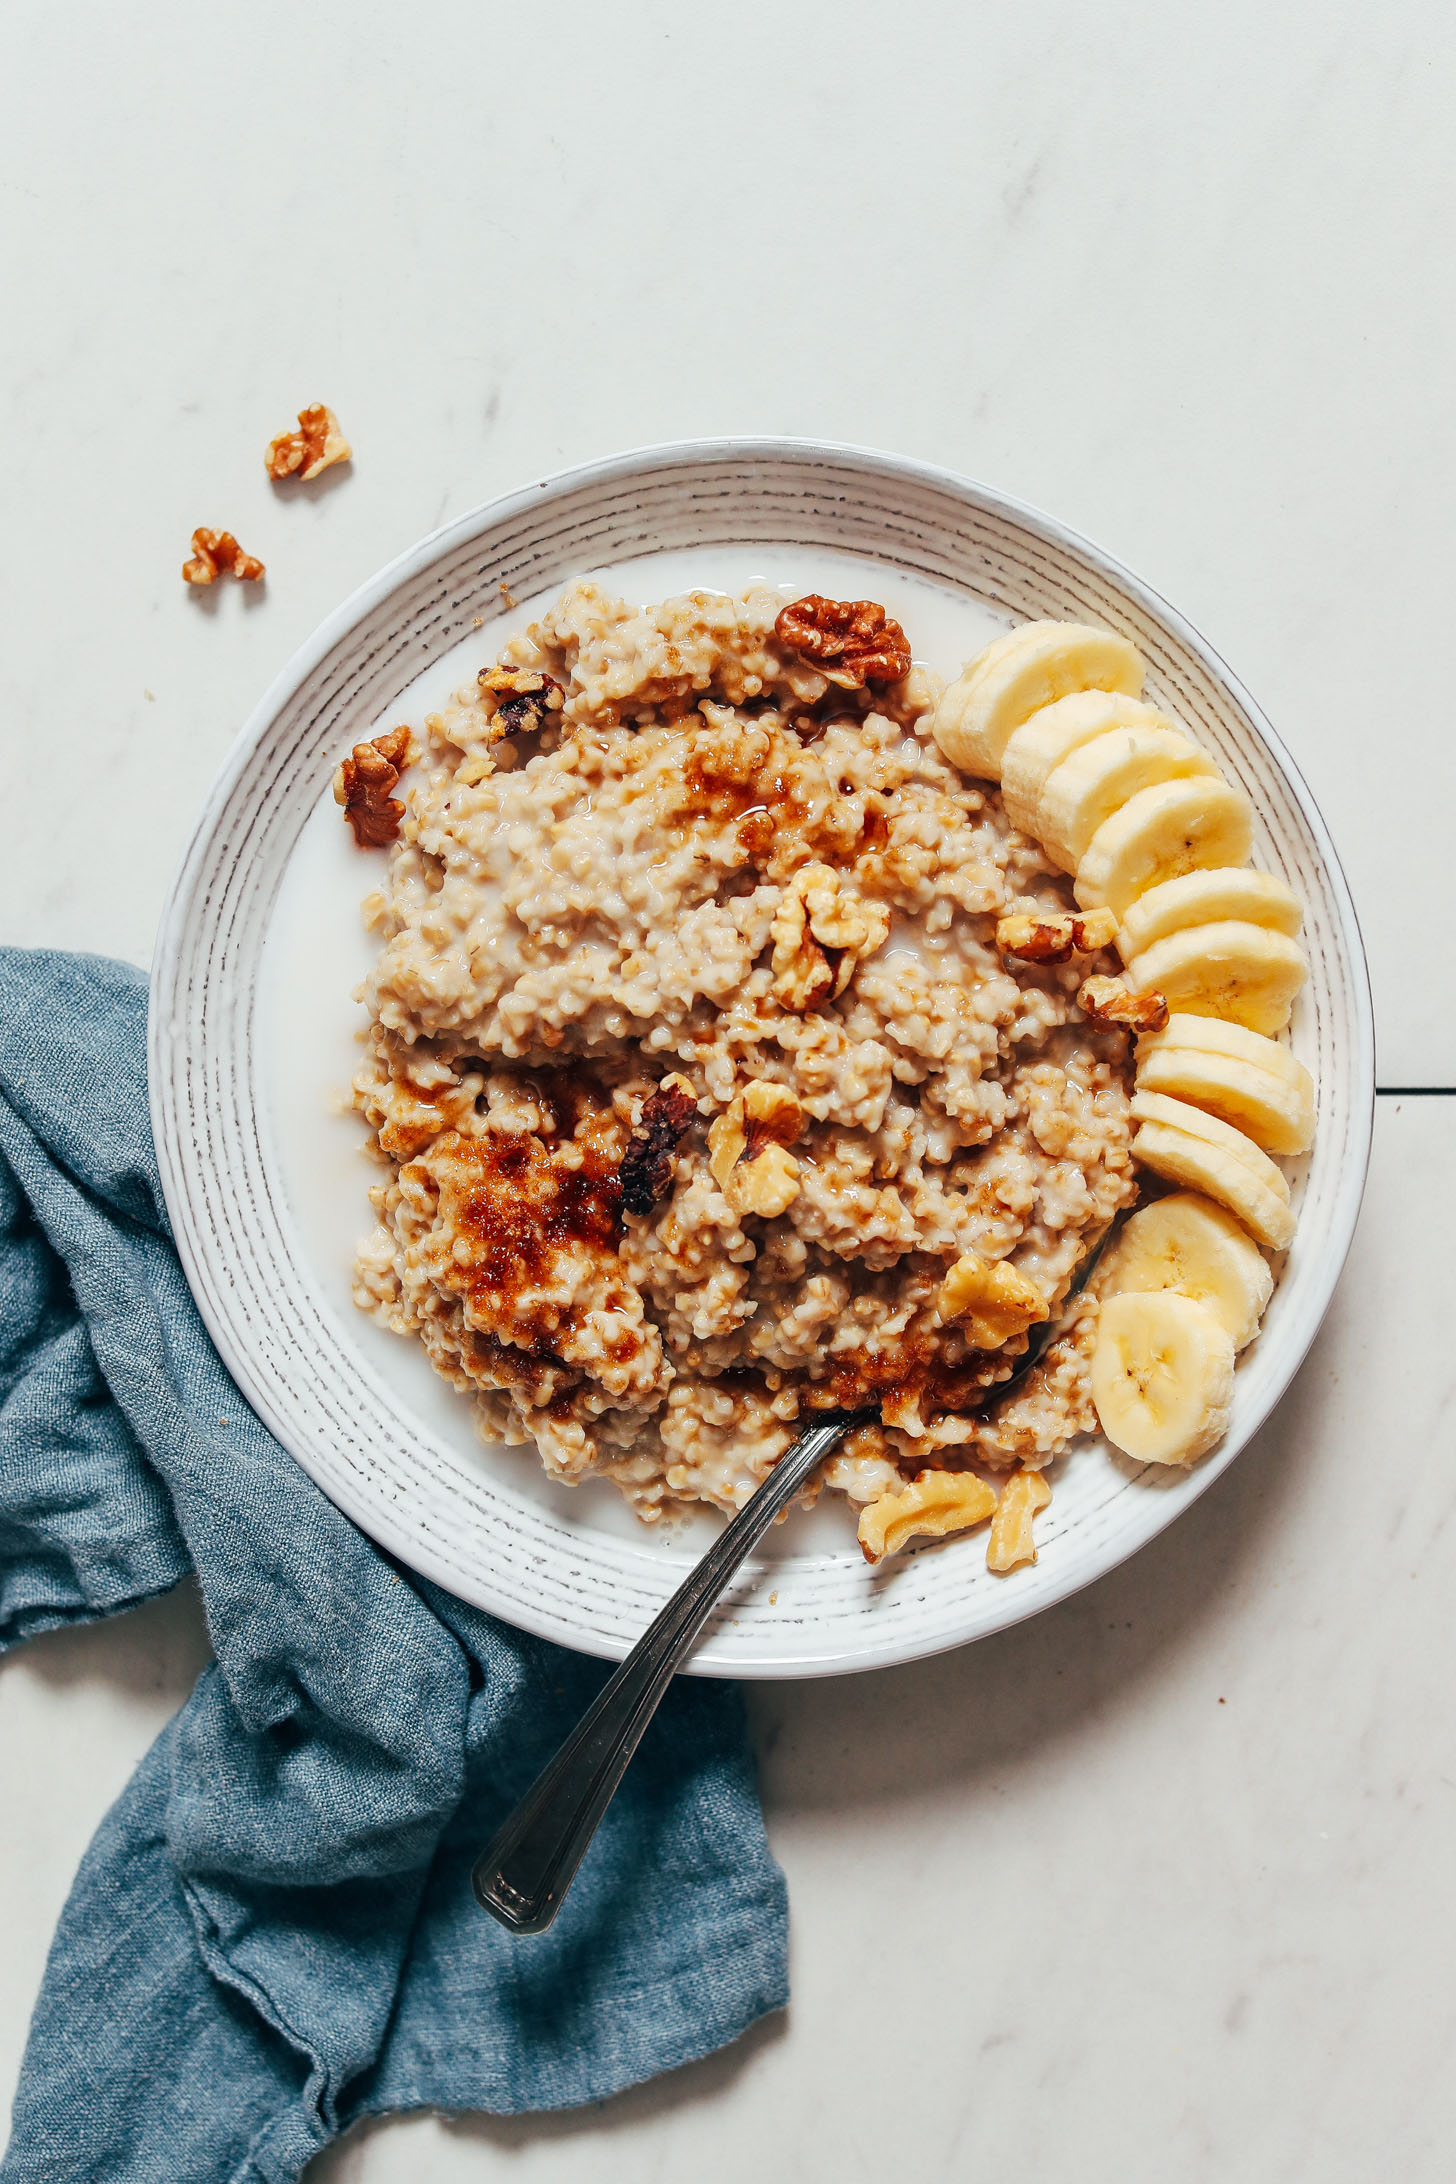 Bowl of Instant Pot steel cut oats with banana, walnuts, brown sugar, and dairy-free milk